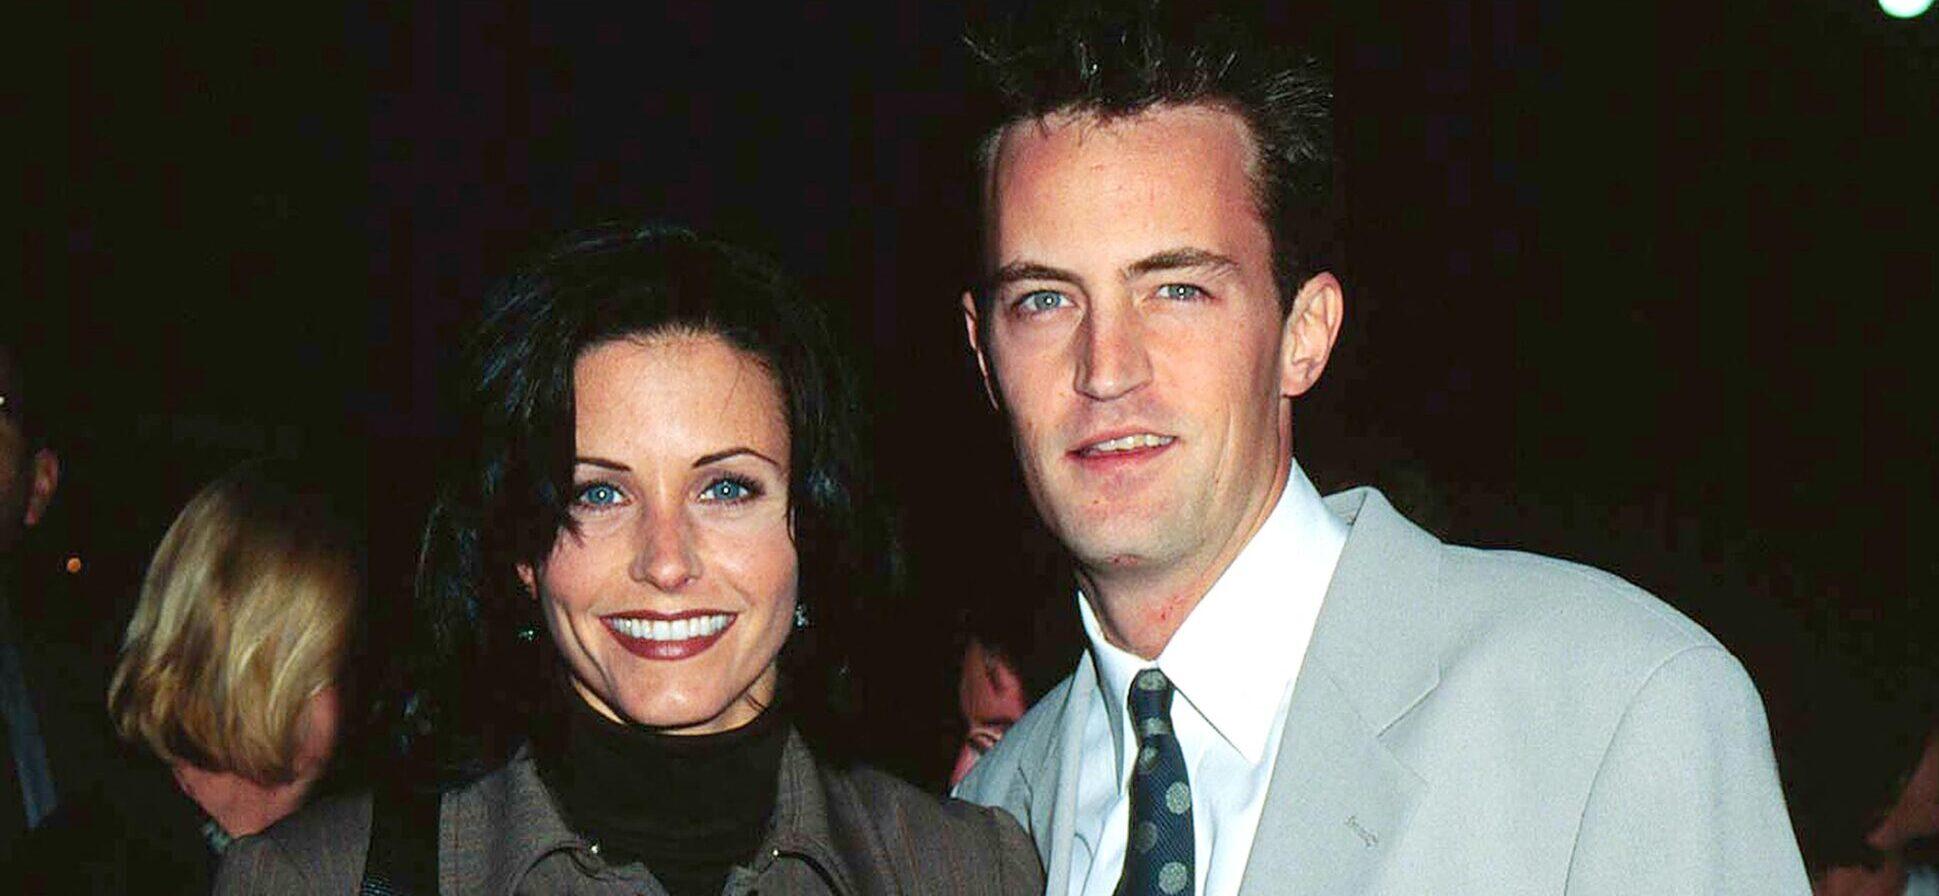 Emotional Video Of Courteney Cox & Matthew Perry Resurfaces